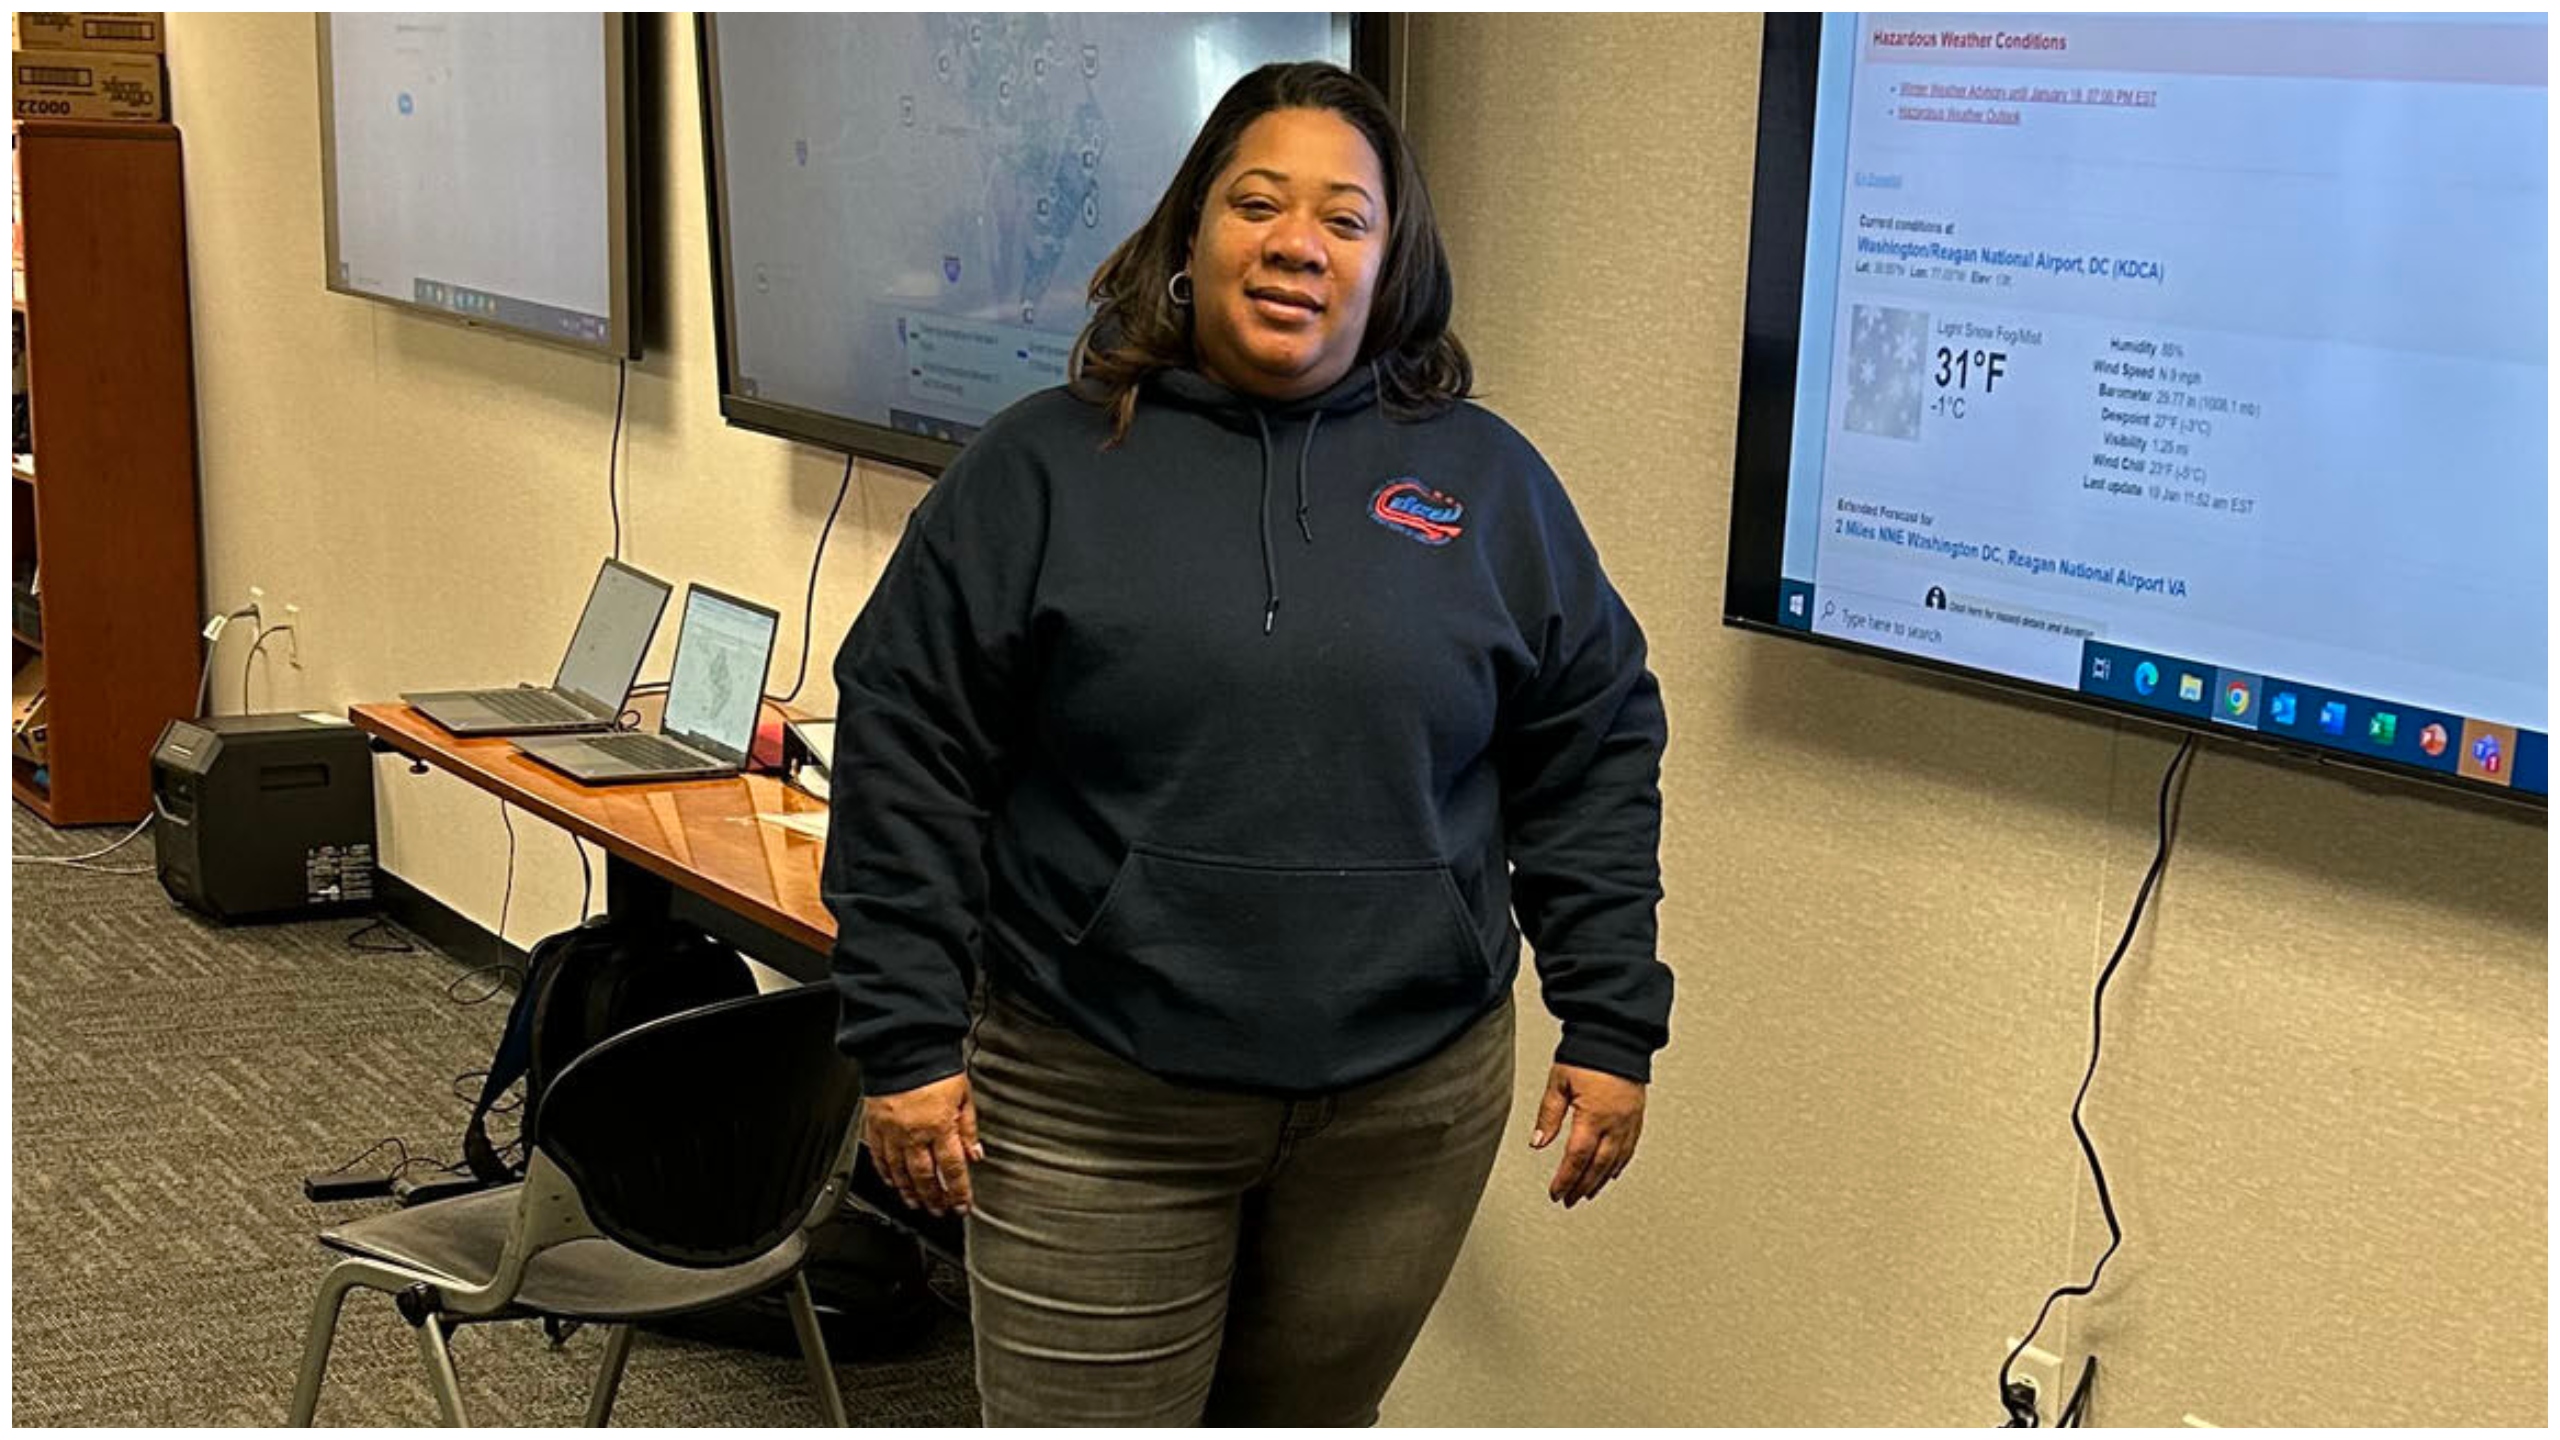 Meet Warnique West The First Black Female To Lead DC’s Winter Weather Response As Snow Coordinator